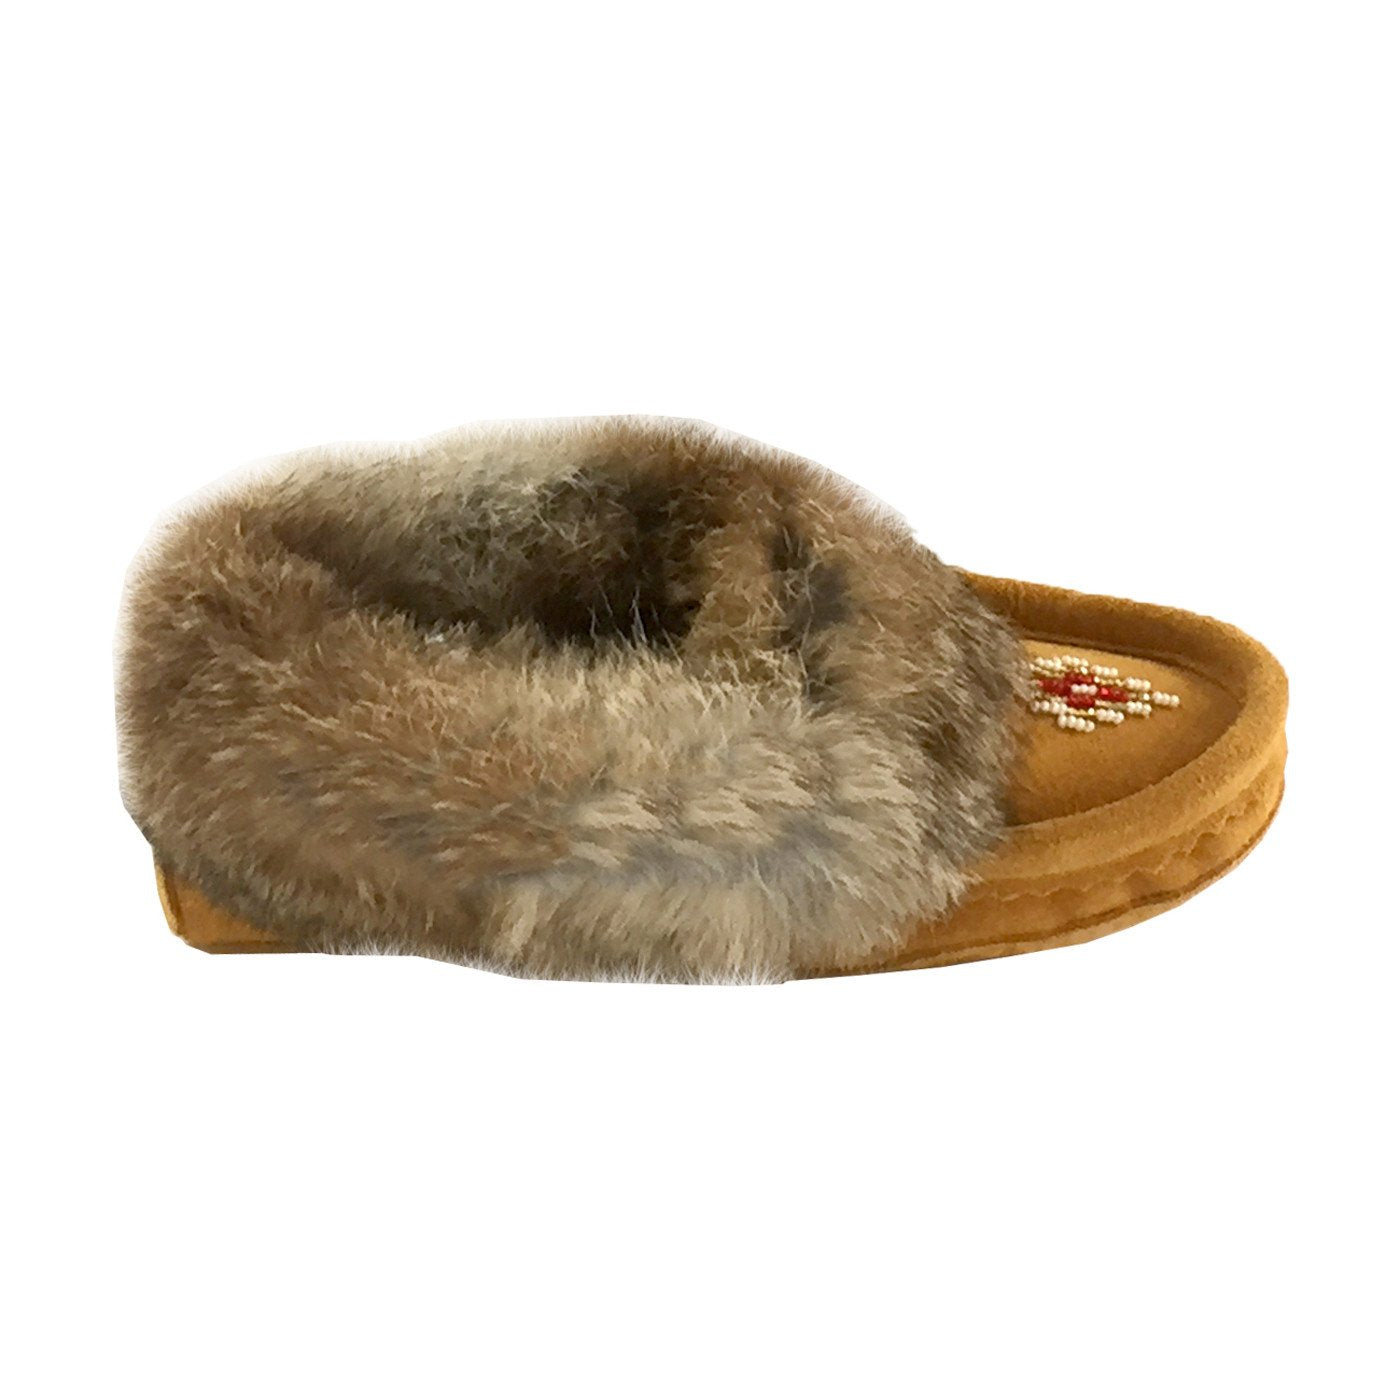 Children's Lined Rabbit Fur Beaded Moccasins (Final Clearance)